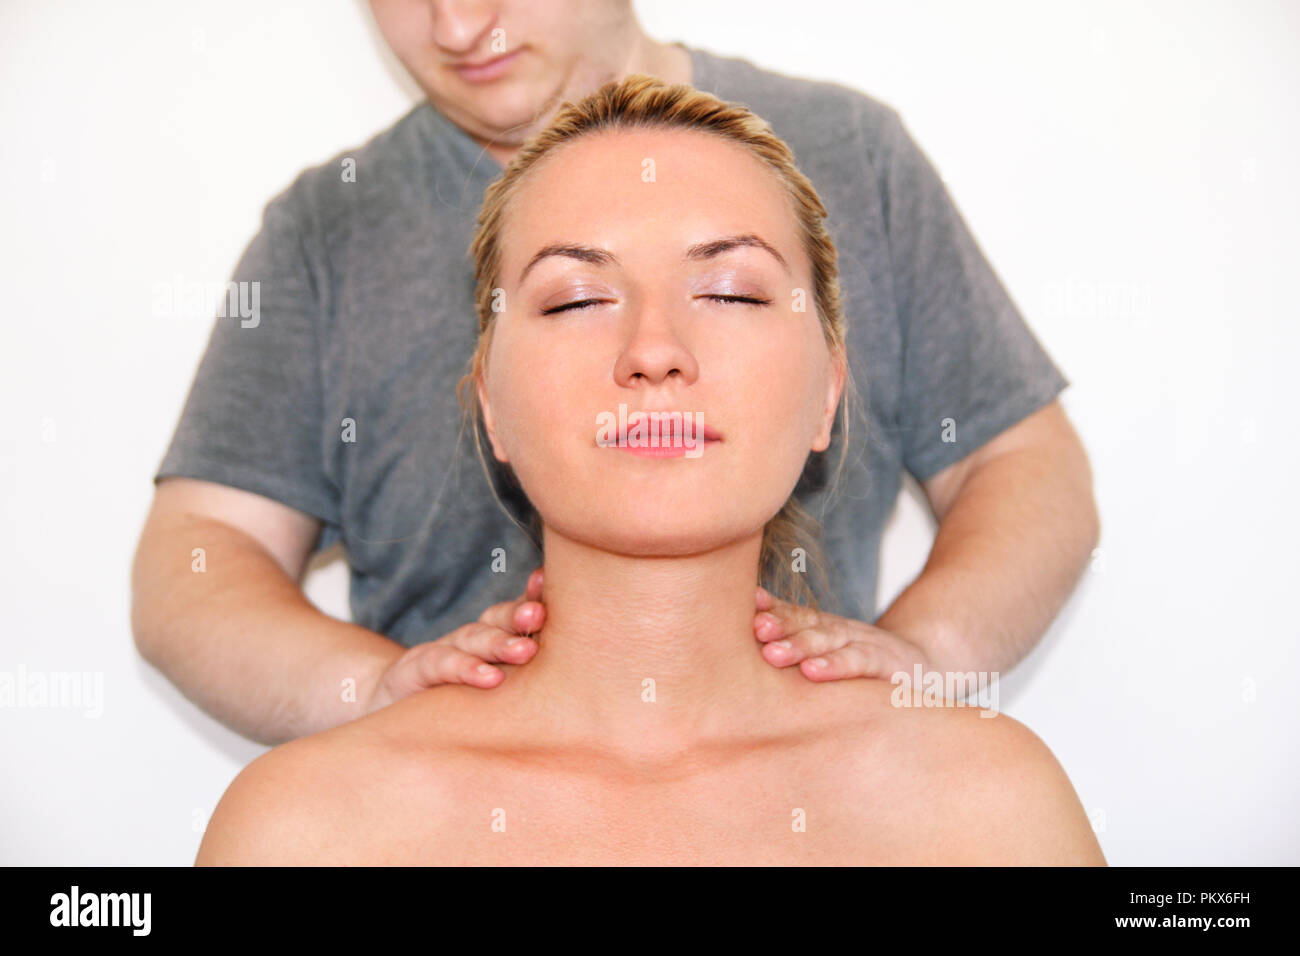 Massage relax studio. Woman having her neck massaged by a